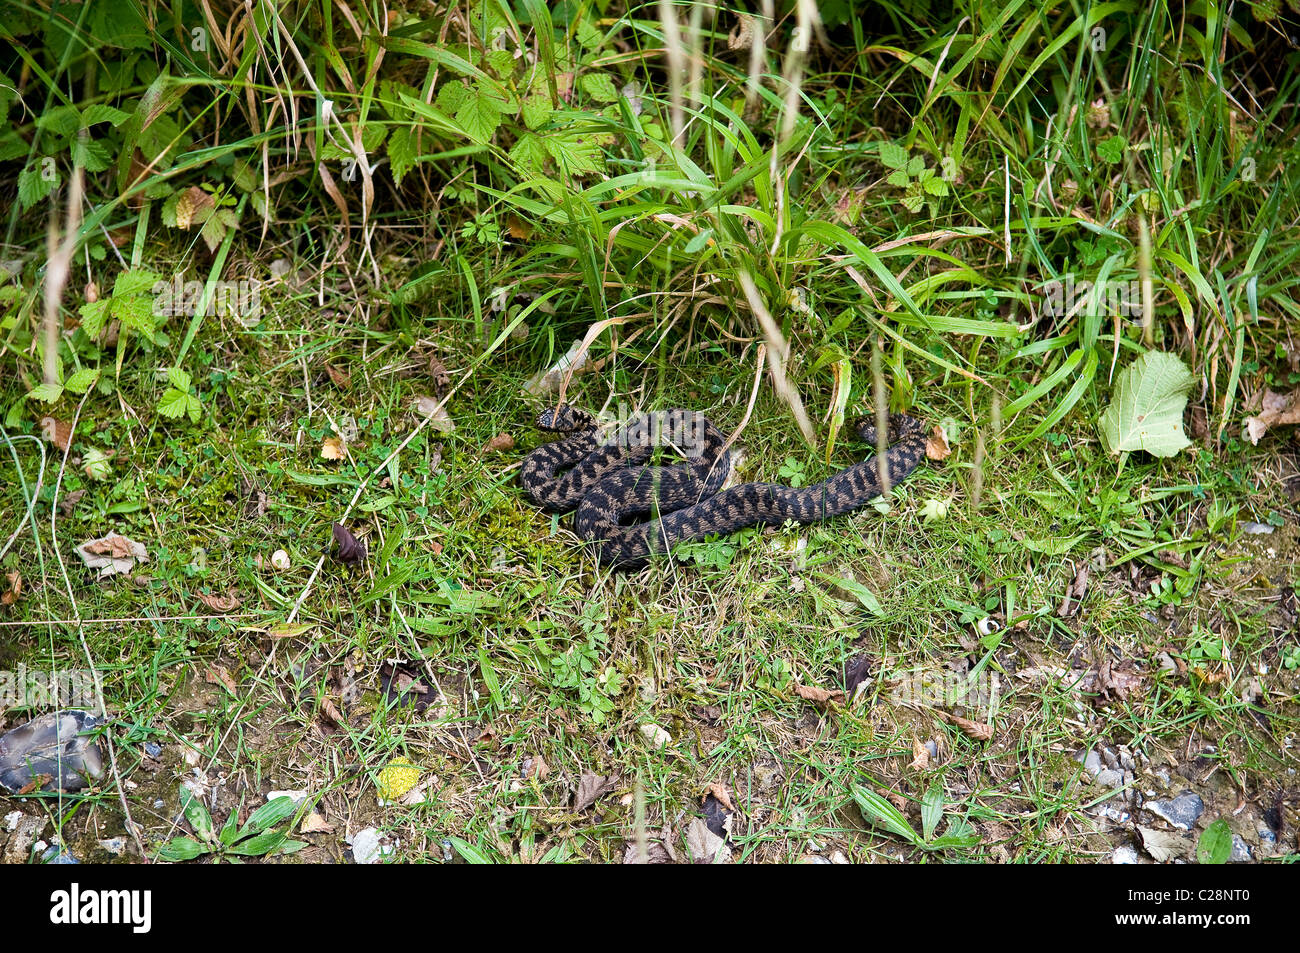 An Adder snake basking in the warmth of a summers day on the South Downs, Sussex, UK Stock Photo